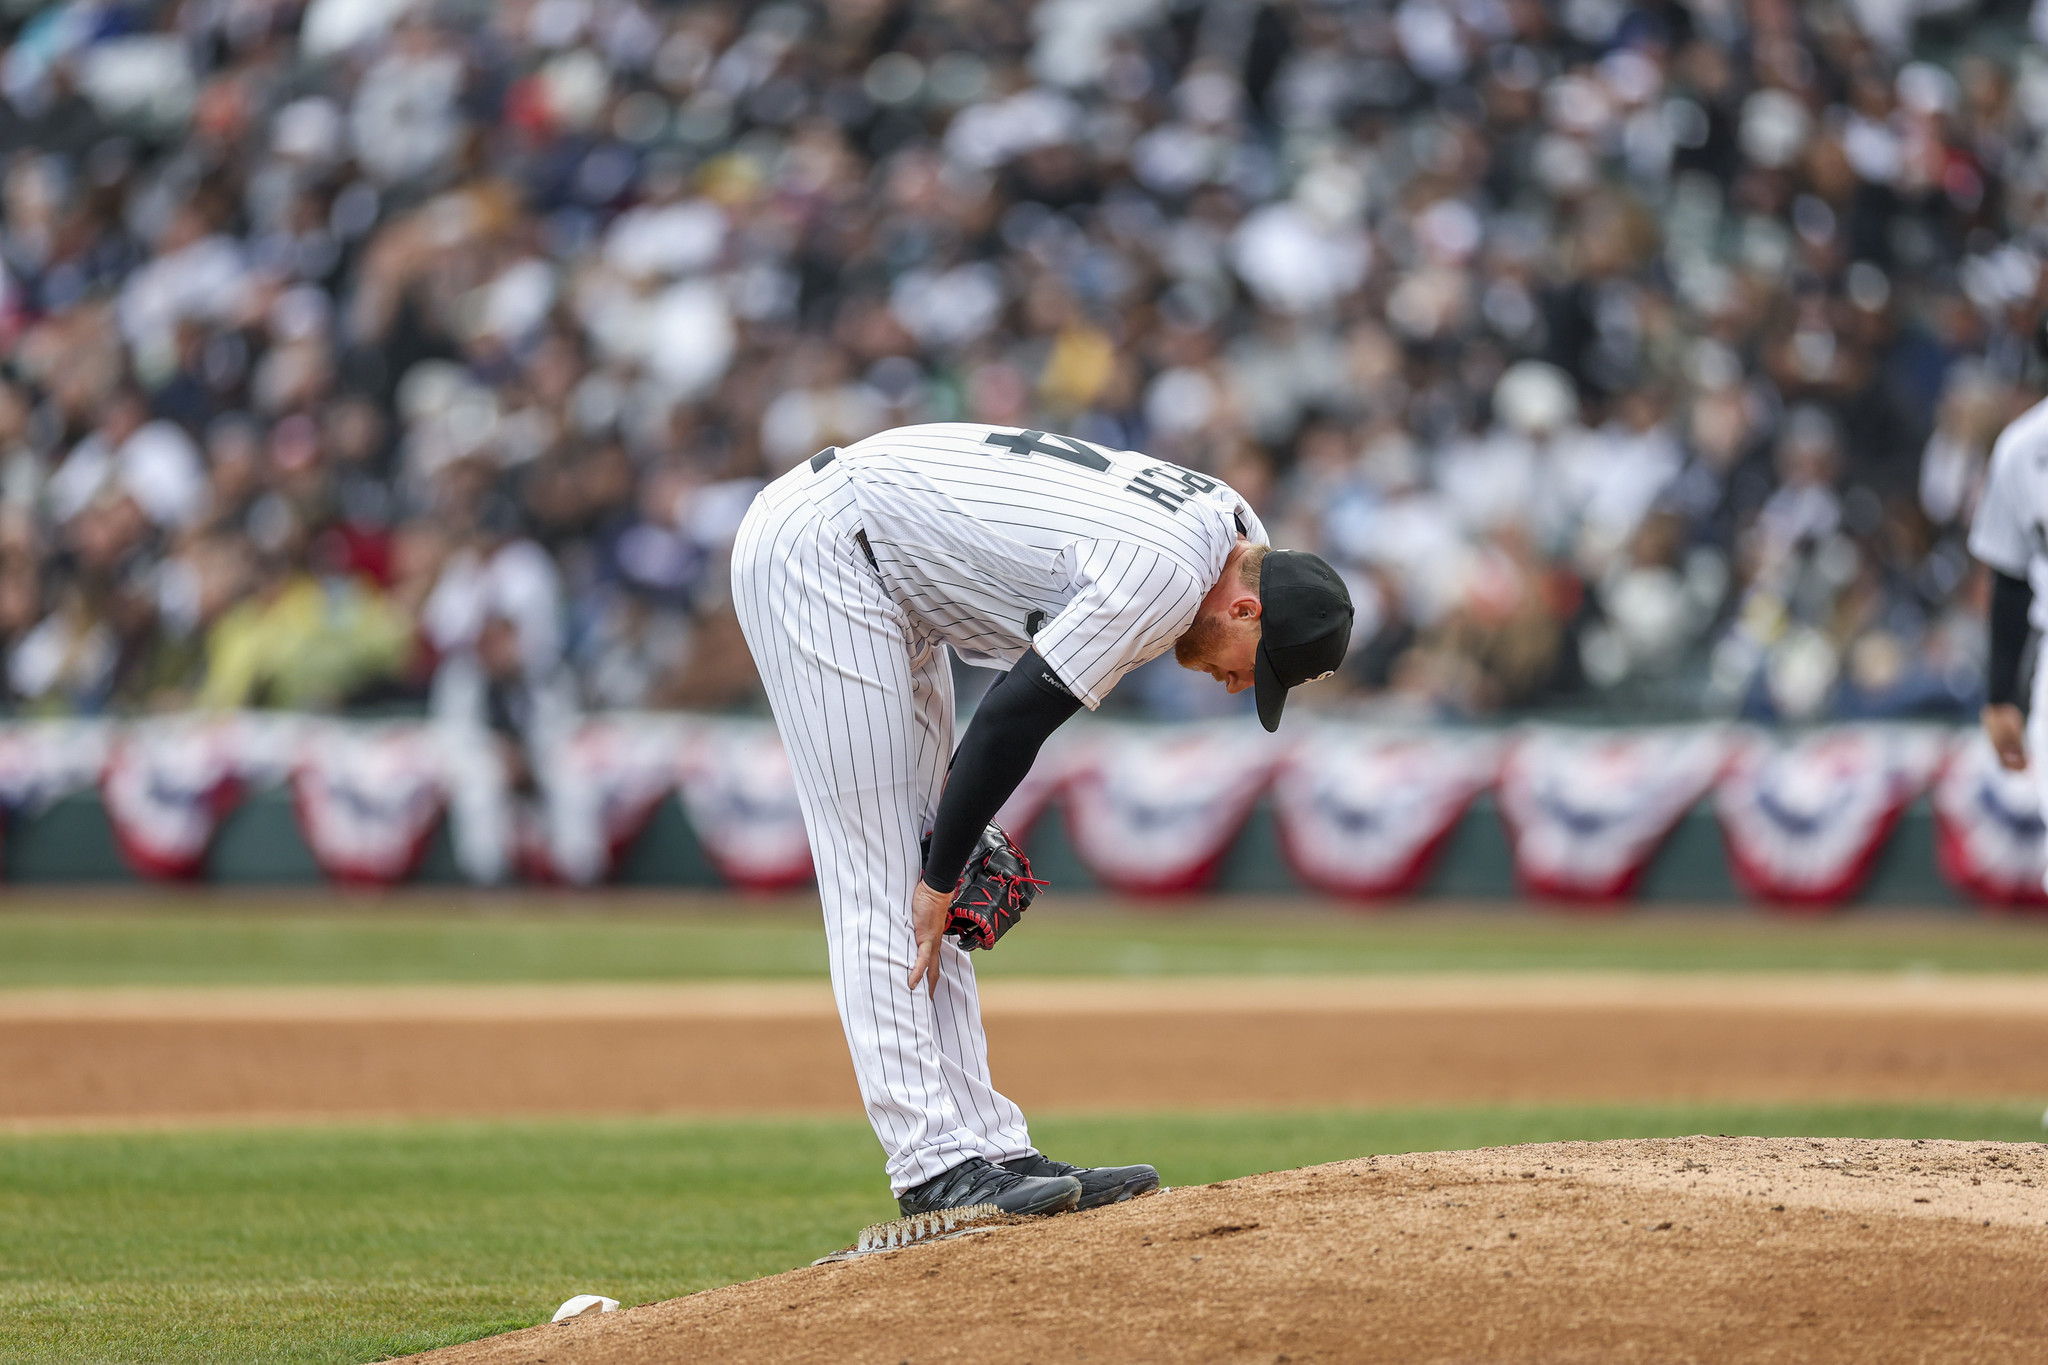 Michael Kopech says 'It's tough right now' after White Sox latest loss to  Twins - Chicago Sun-Times